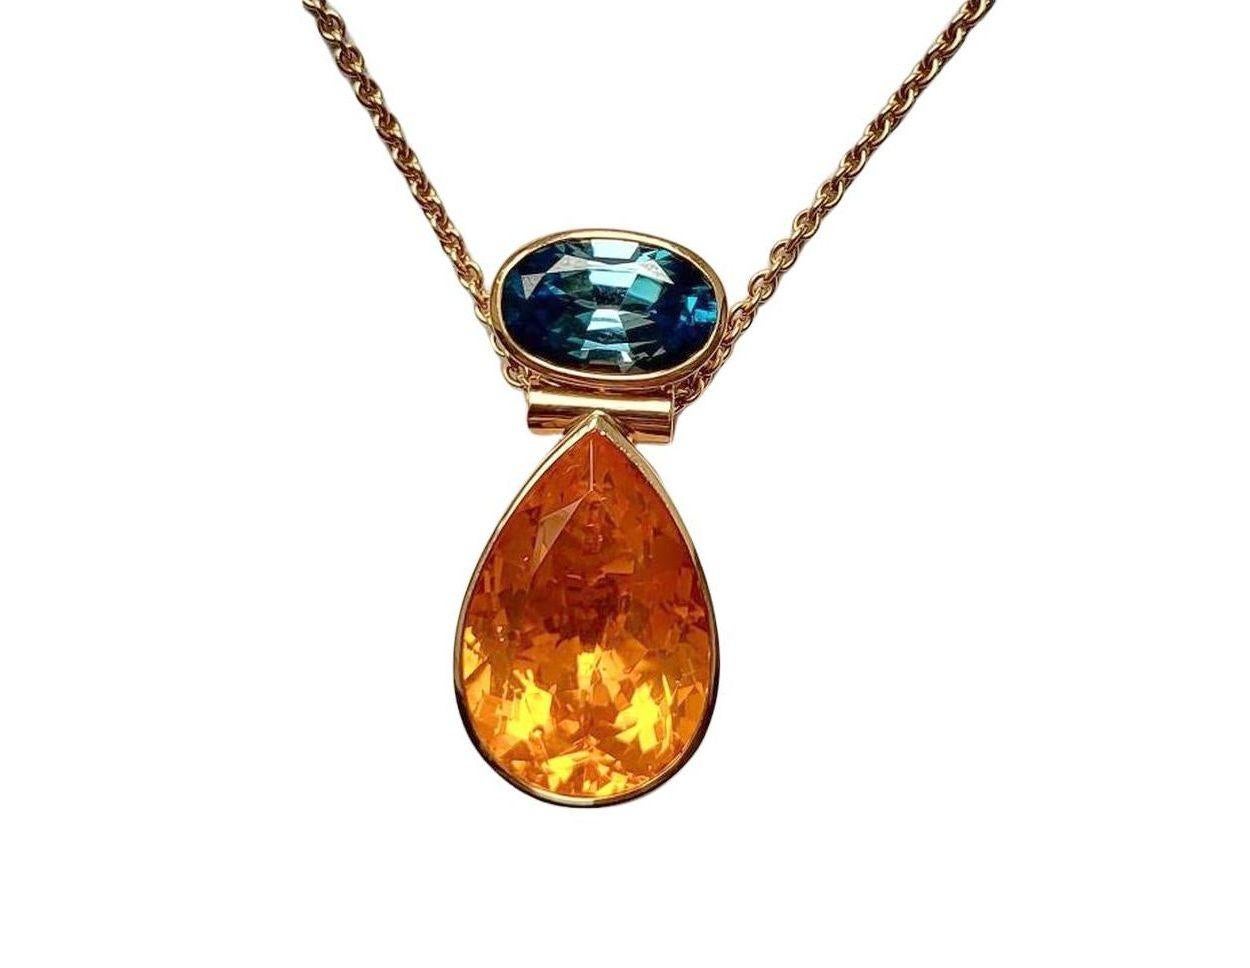 This magnificent creation of fine jewelry was made by Georg Spreng for Wagner Preziosen, who provided the  gemstones. 
The sparkling luscious orange of the 15.52 carat fire opal drop is complemented by the radiant blue of the 7.01 carat oval zircon.